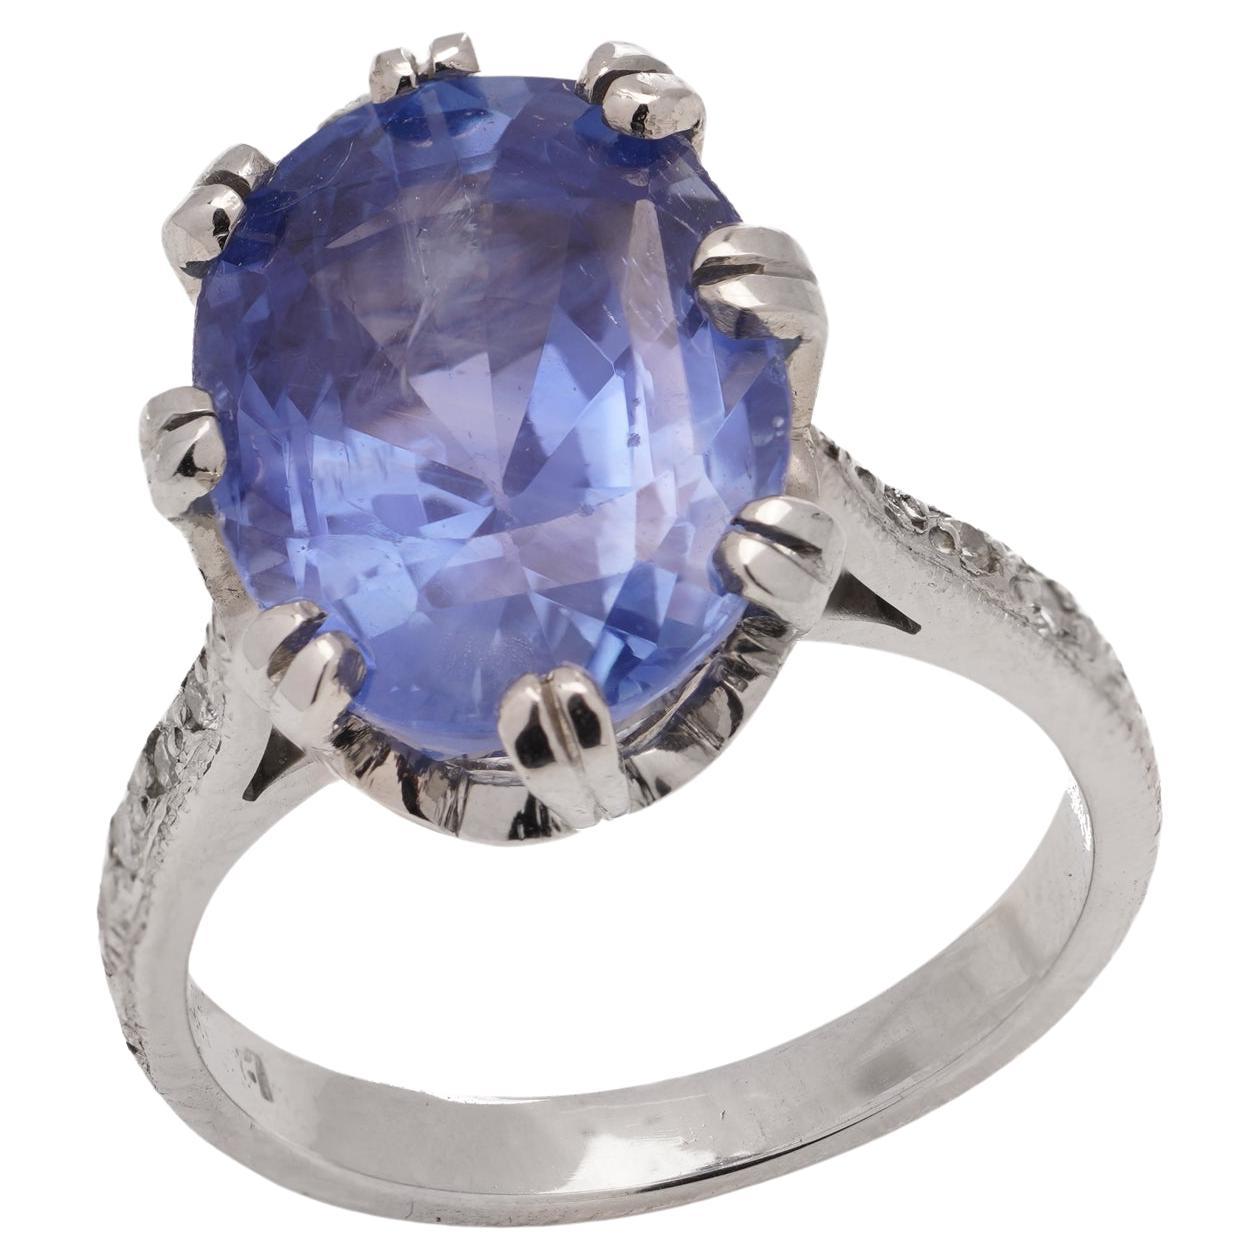 950 Platinum 5.50 carats of oval faceted sapphire and diamond ring For Sale